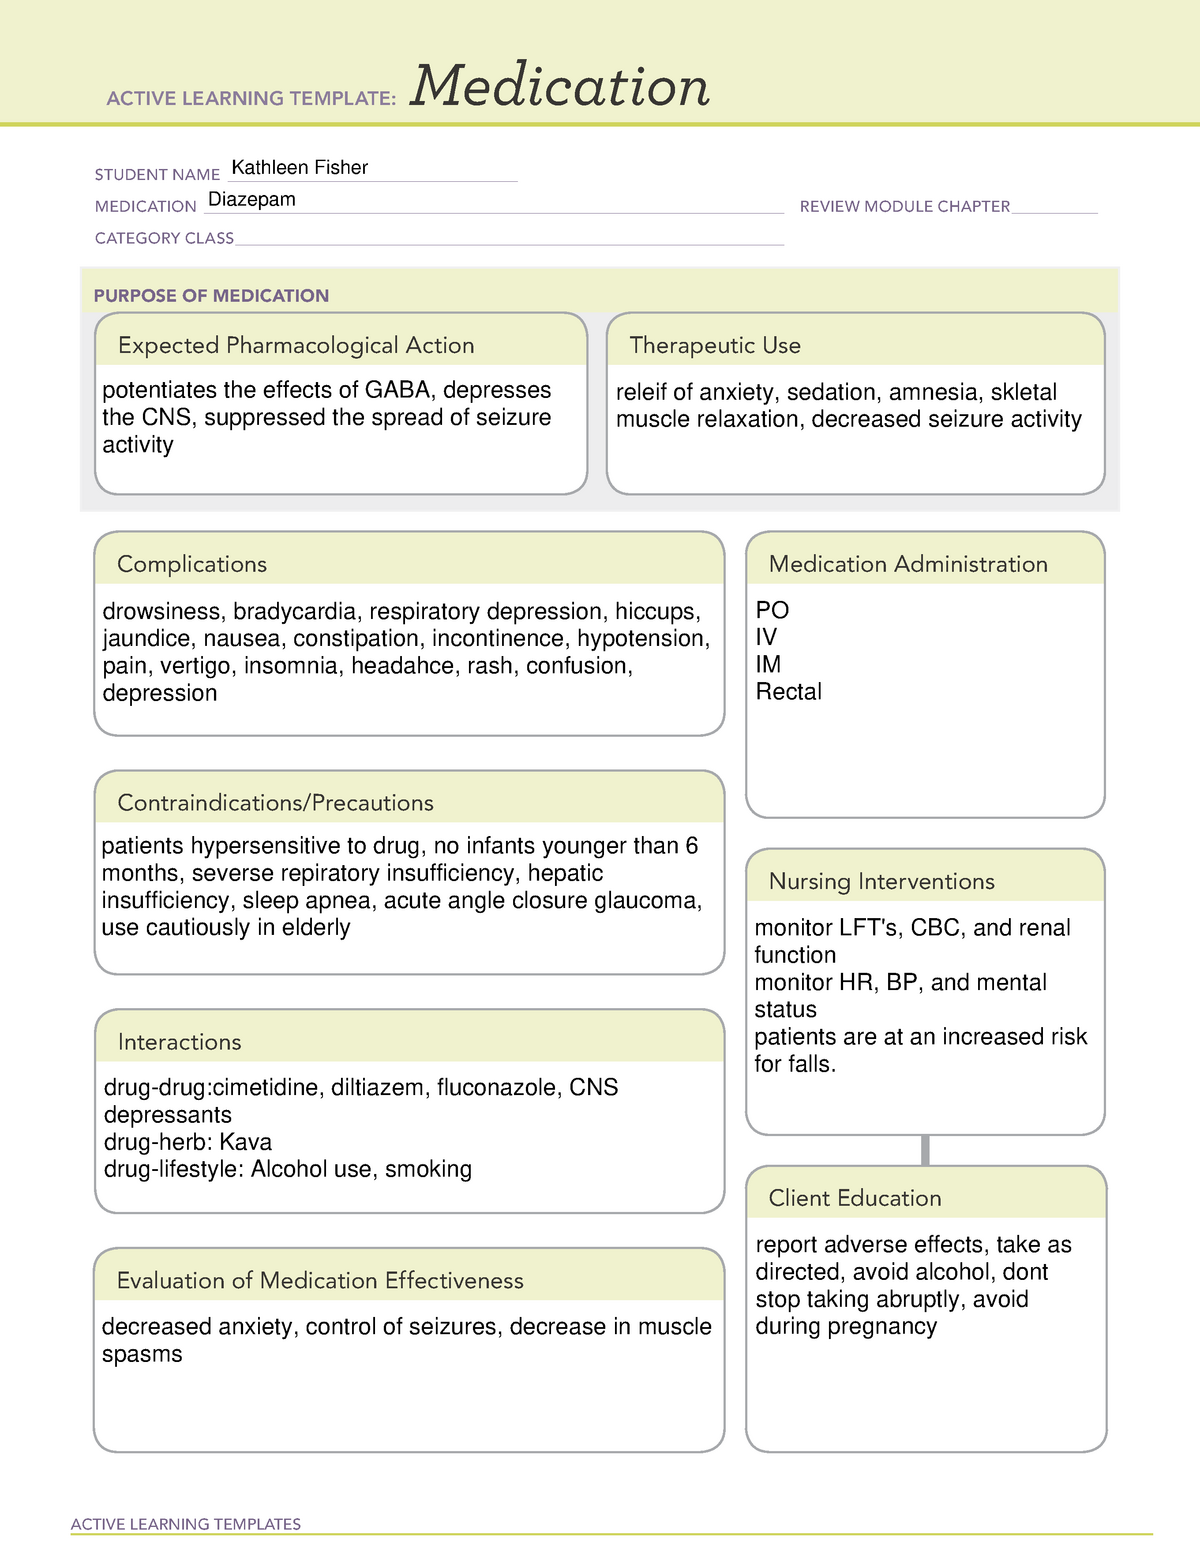 Ati Medication Template Diazepam Docx Active Learning Template